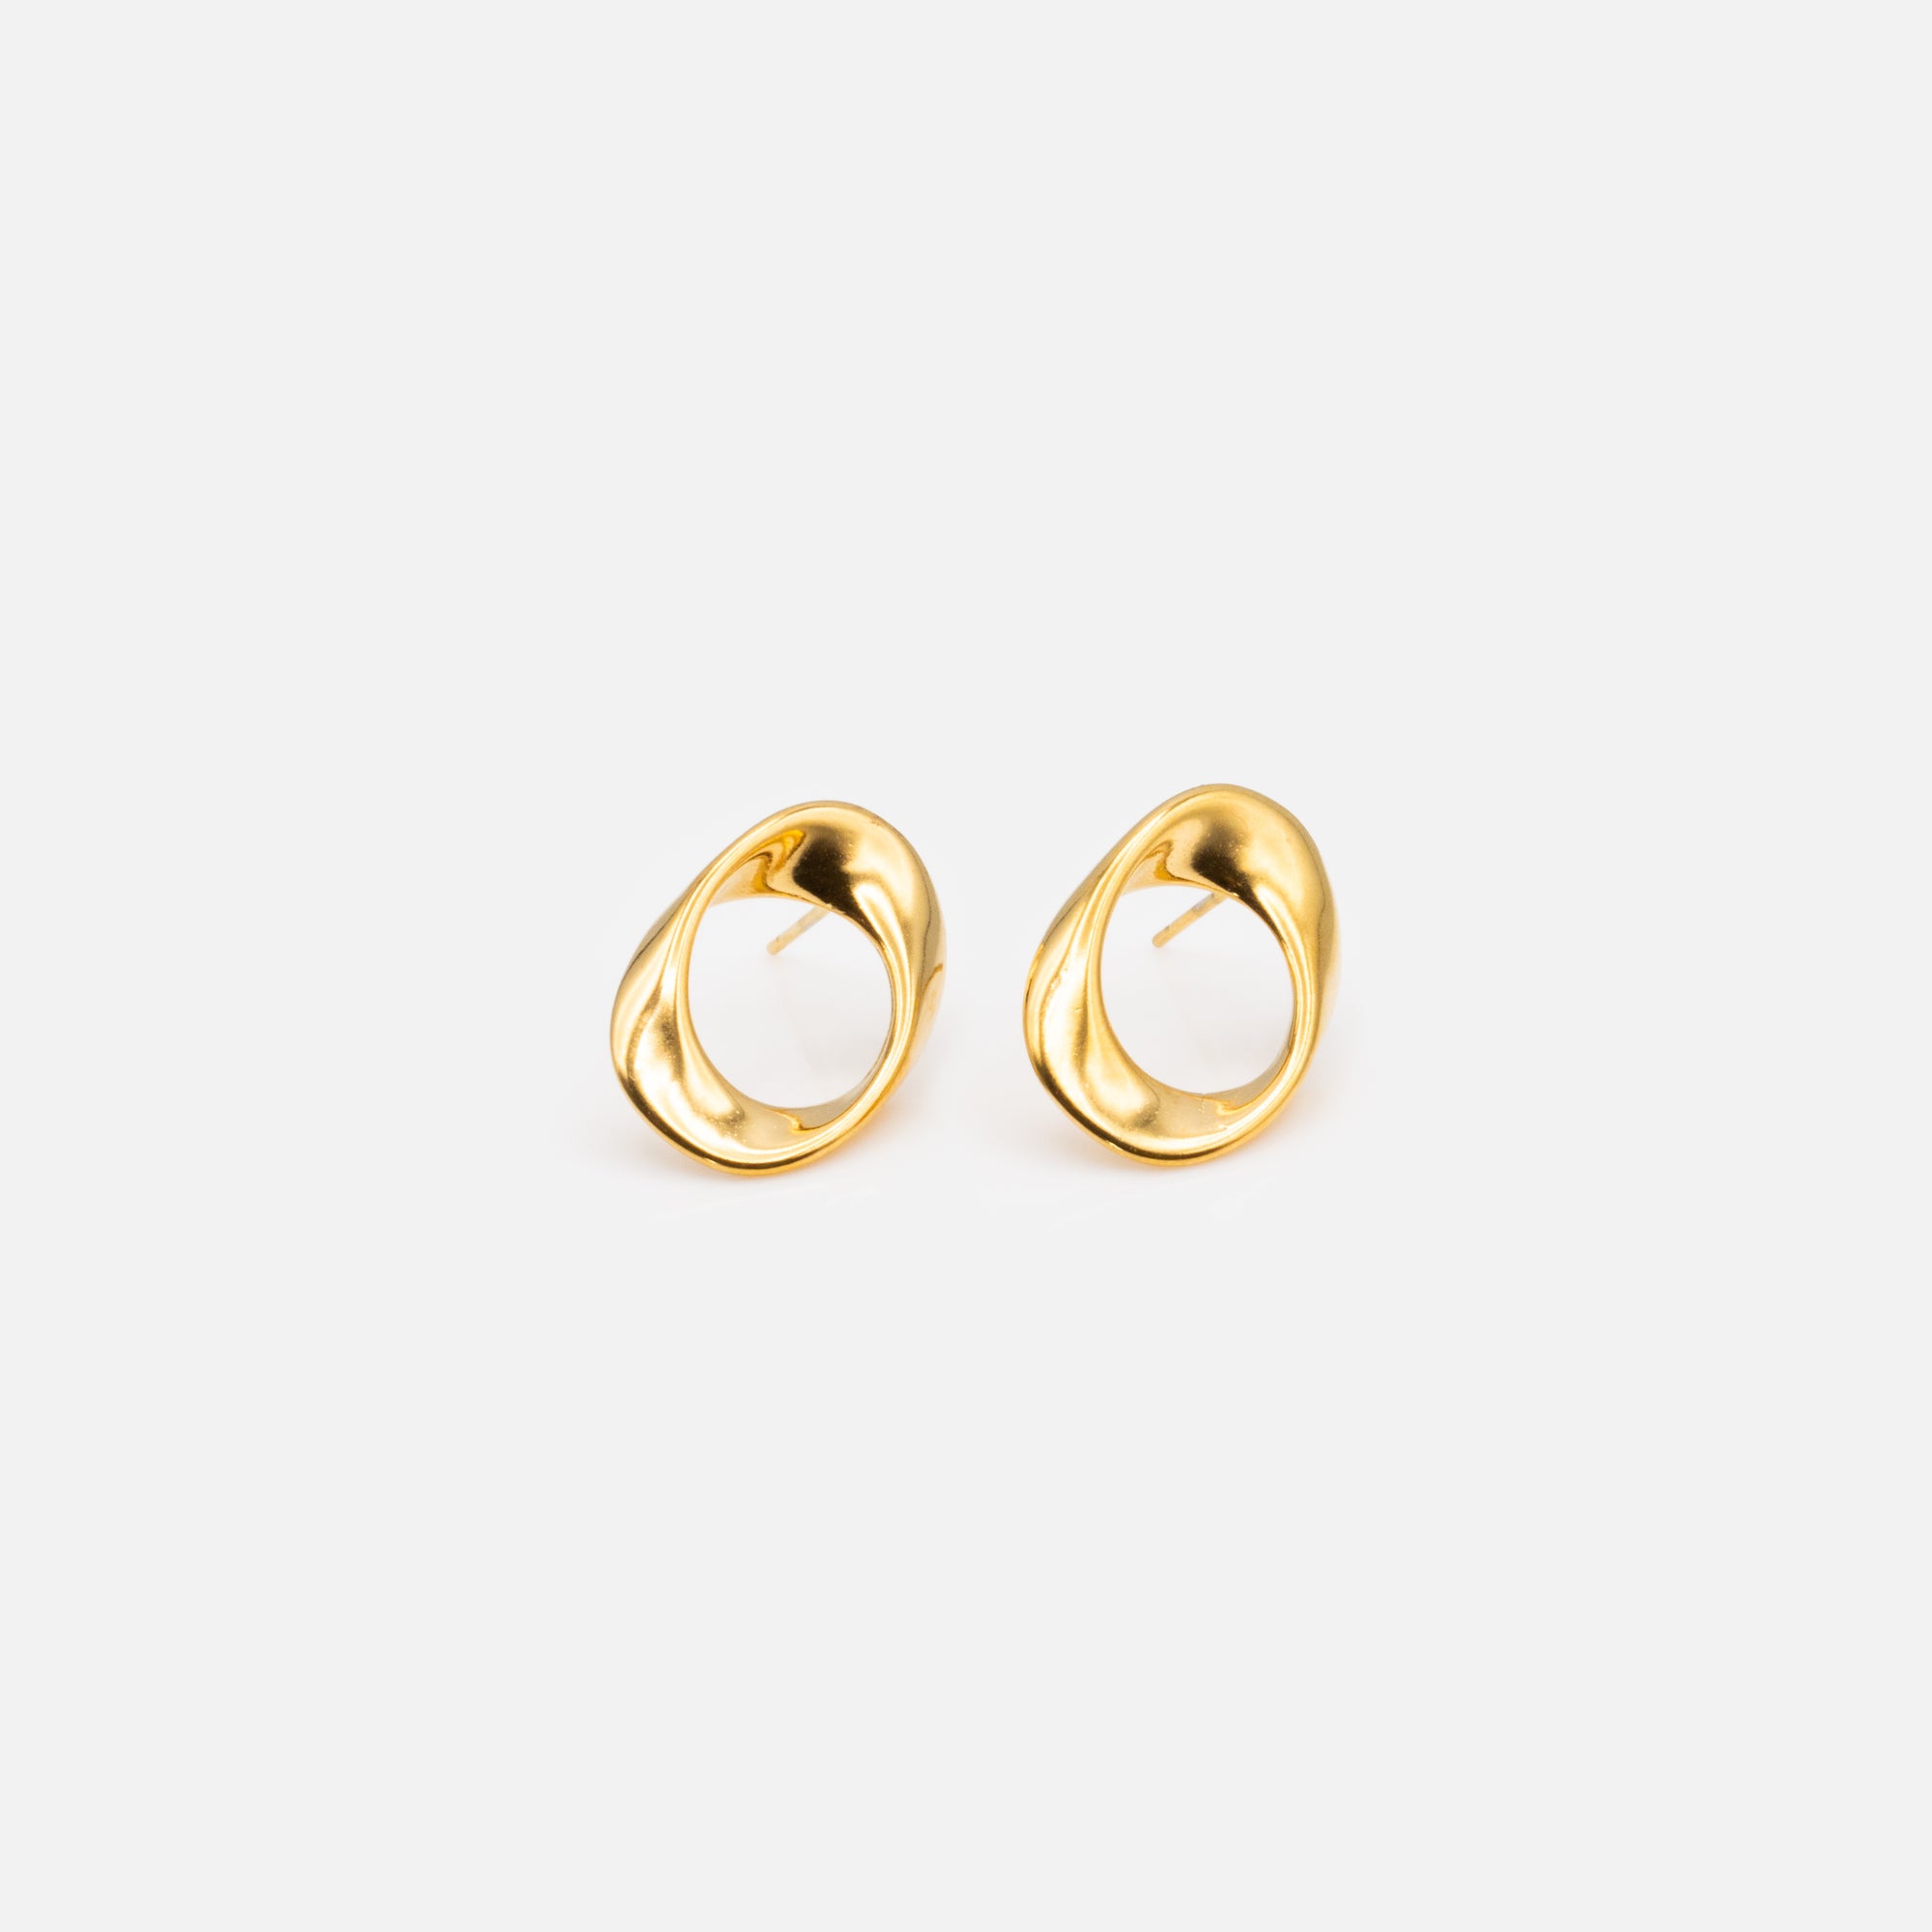 Gold twisted oval earrings in stainless steel